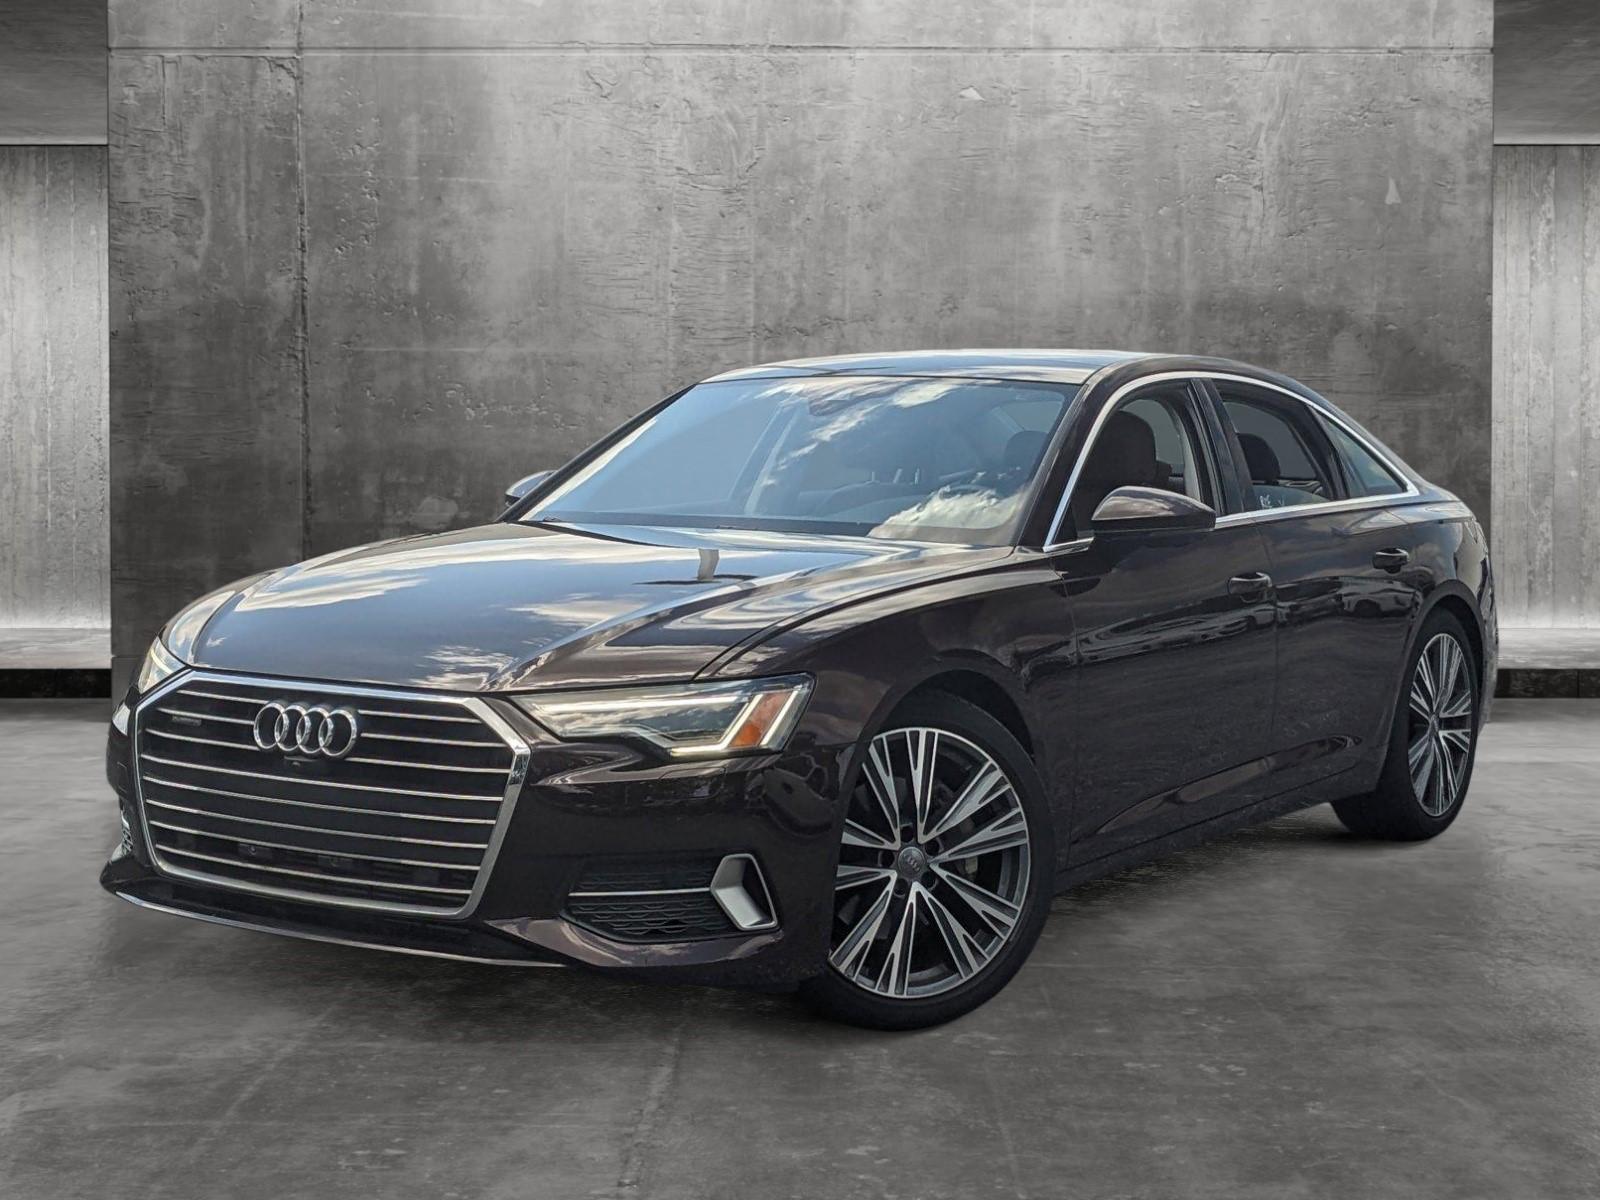 2020 Audi A6 Vehicle Photo in Towson, MD 21204